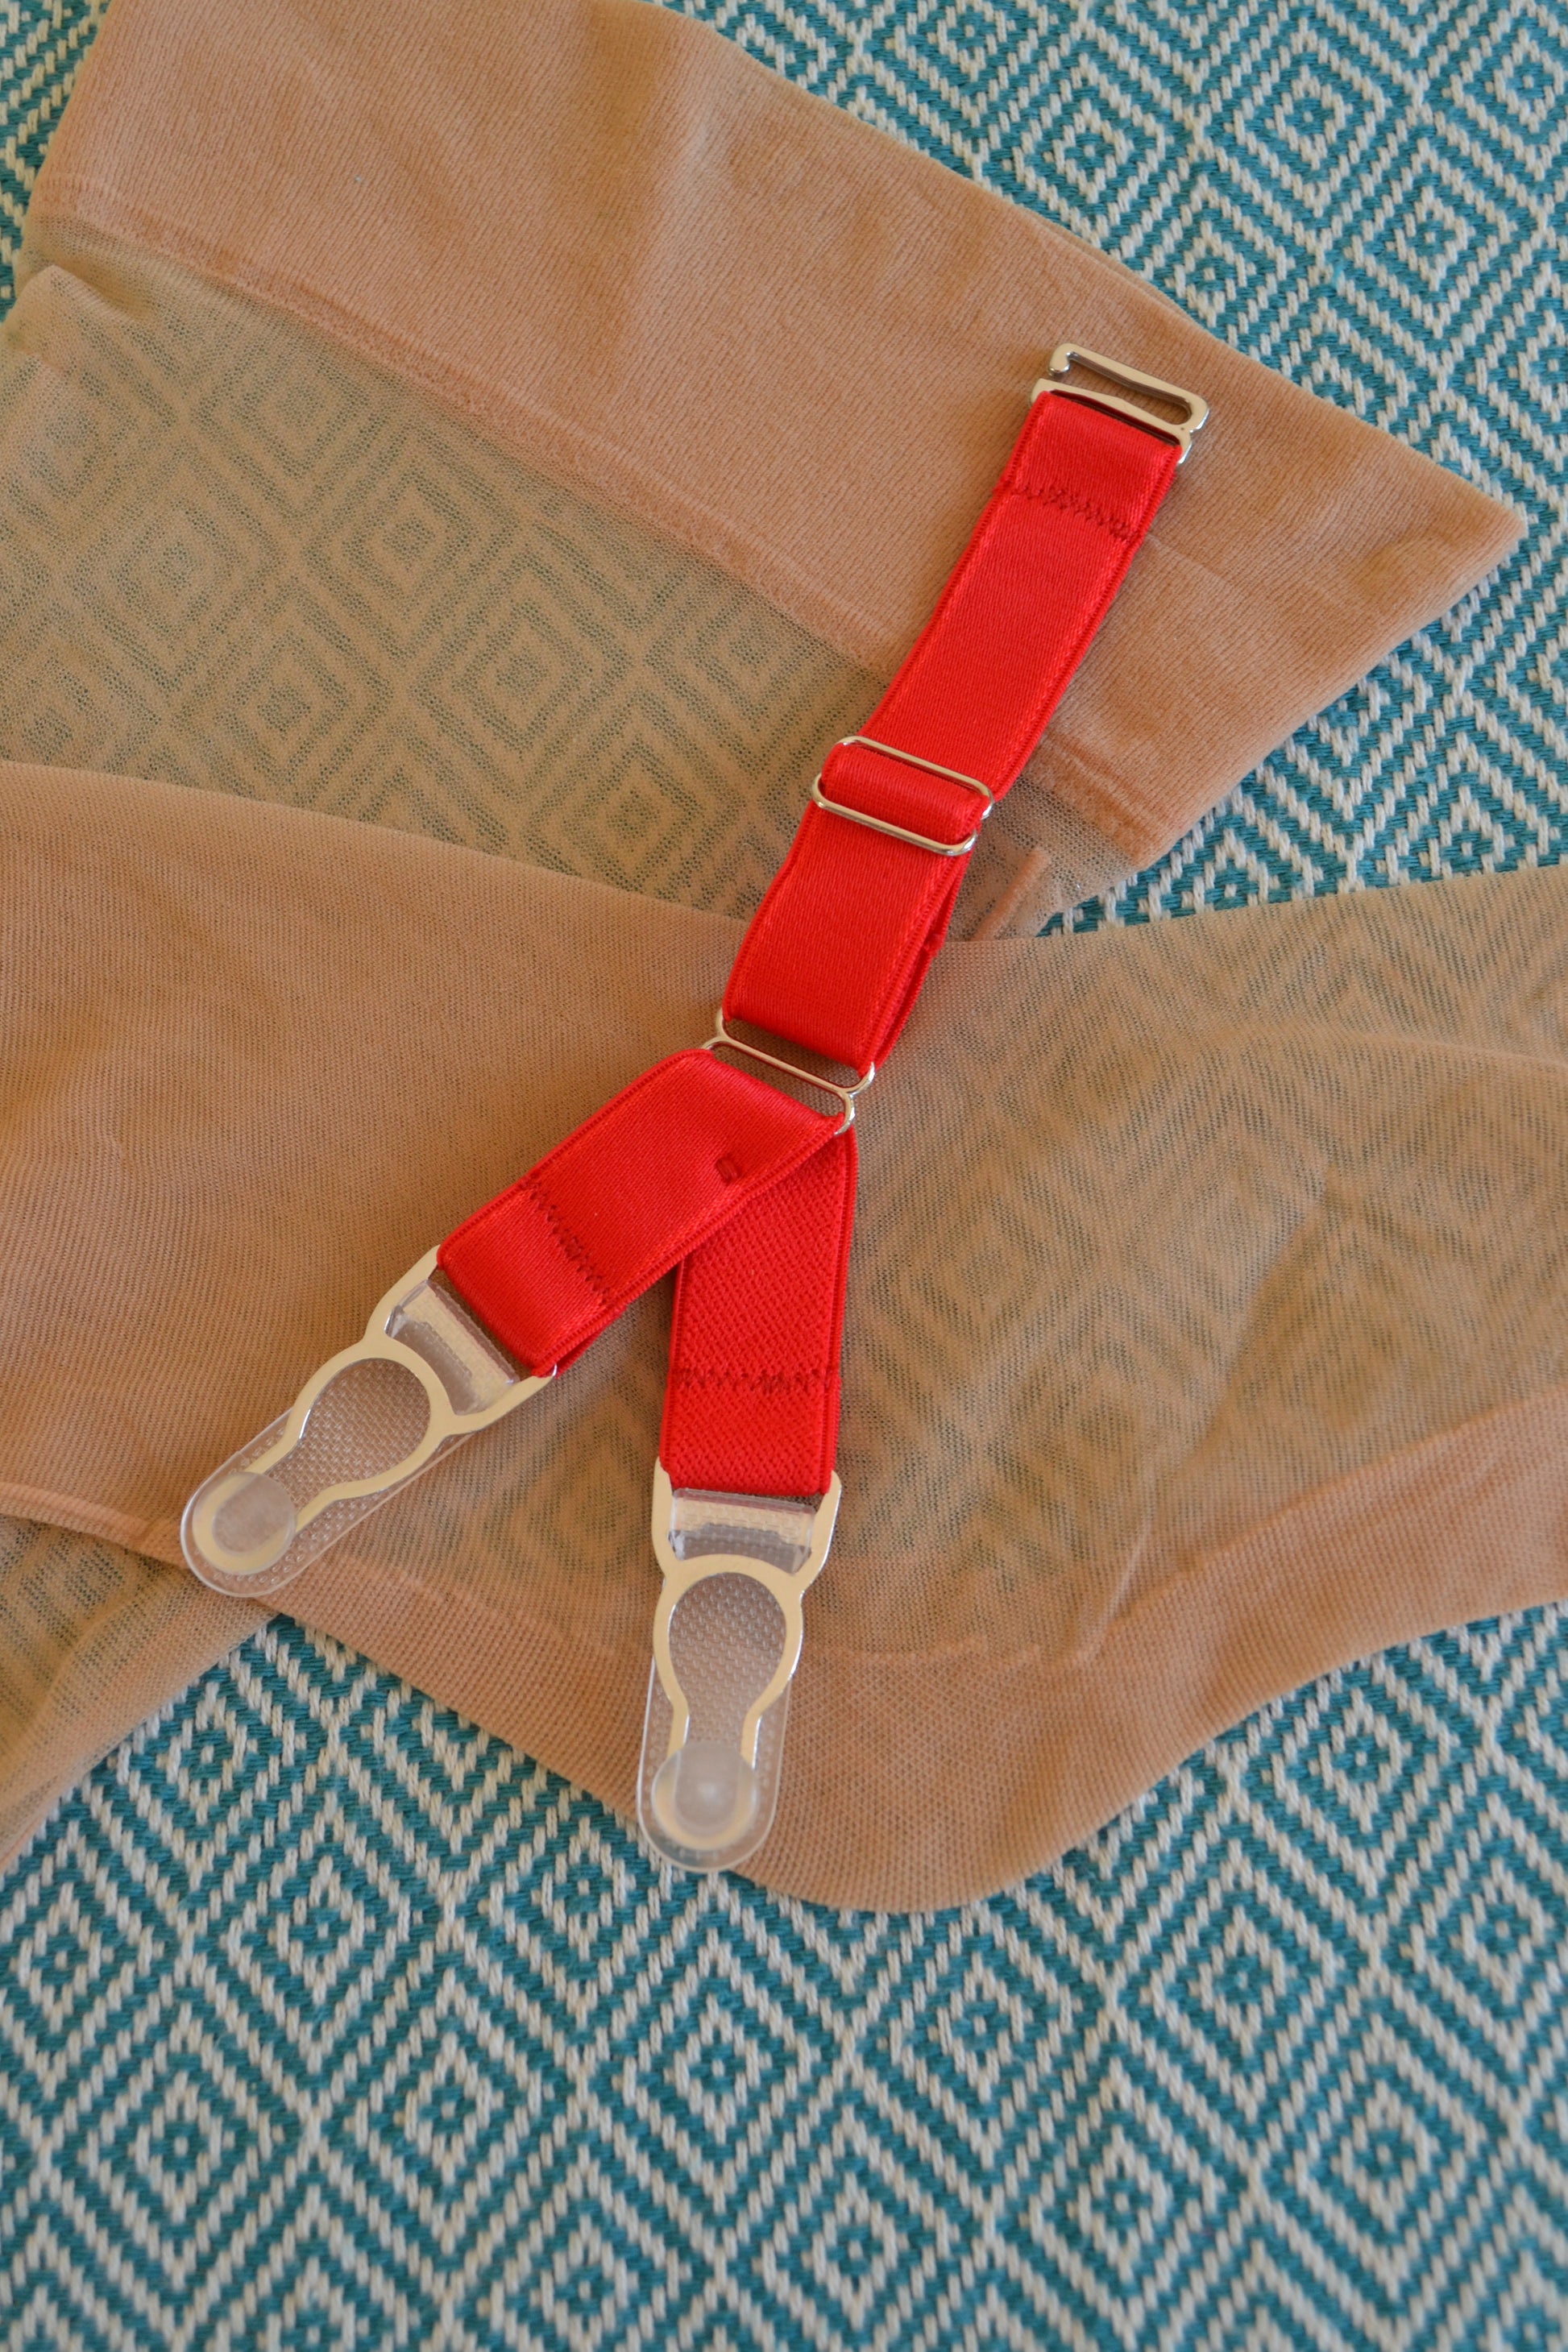  Double suspender straps Y strap garter with a hook on top to attach your corset or masque to seamed nylon stockings. 15mm wide elastic in colour black red white and nude beige biscotti peach.  Steel metal